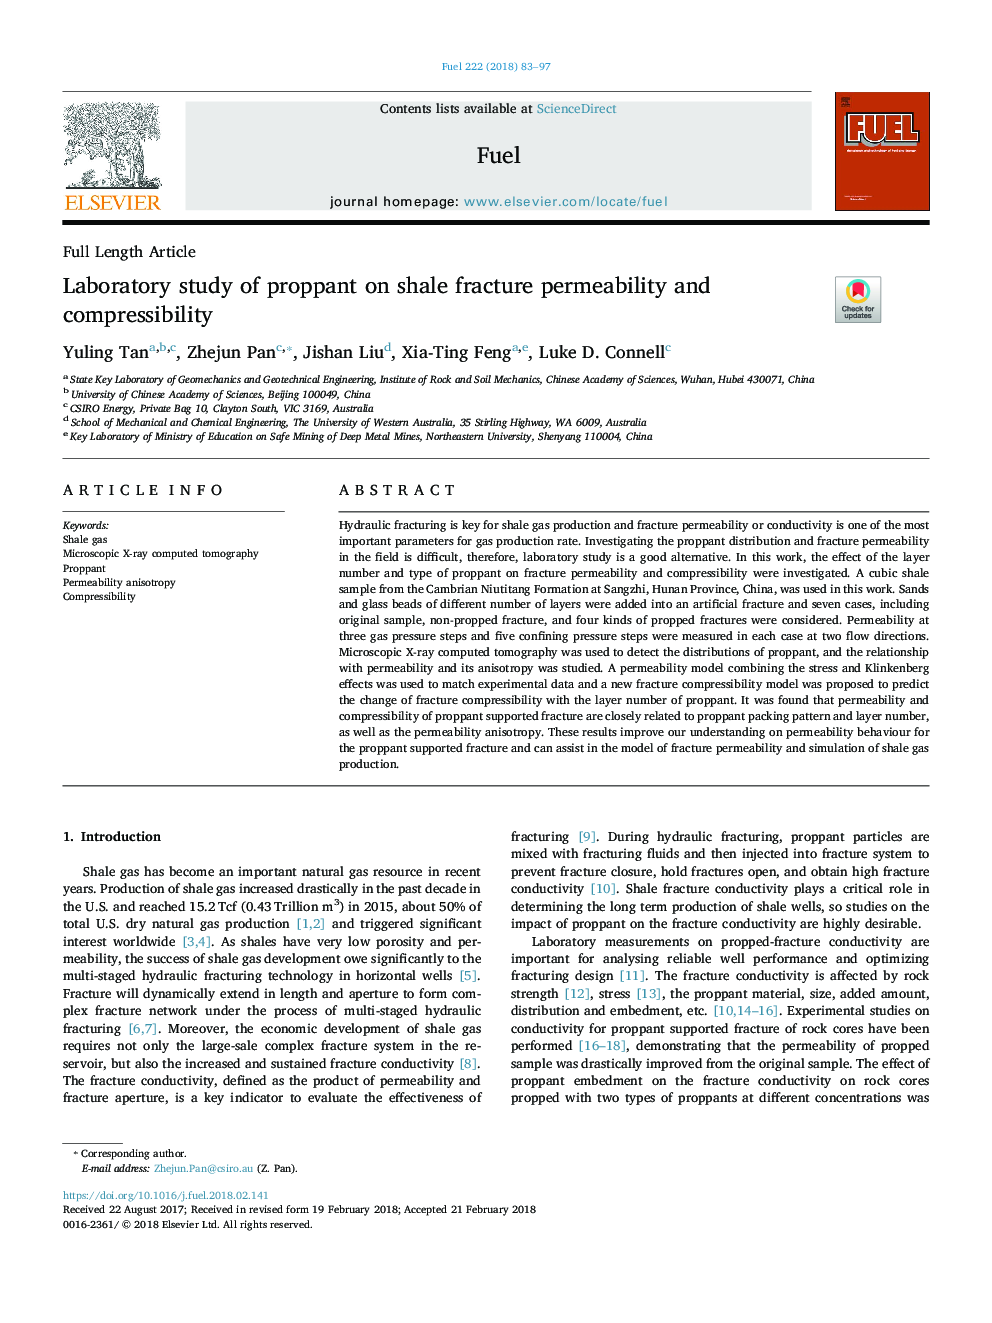 Laboratory study of proppant on shale fracture permeability and compressibility